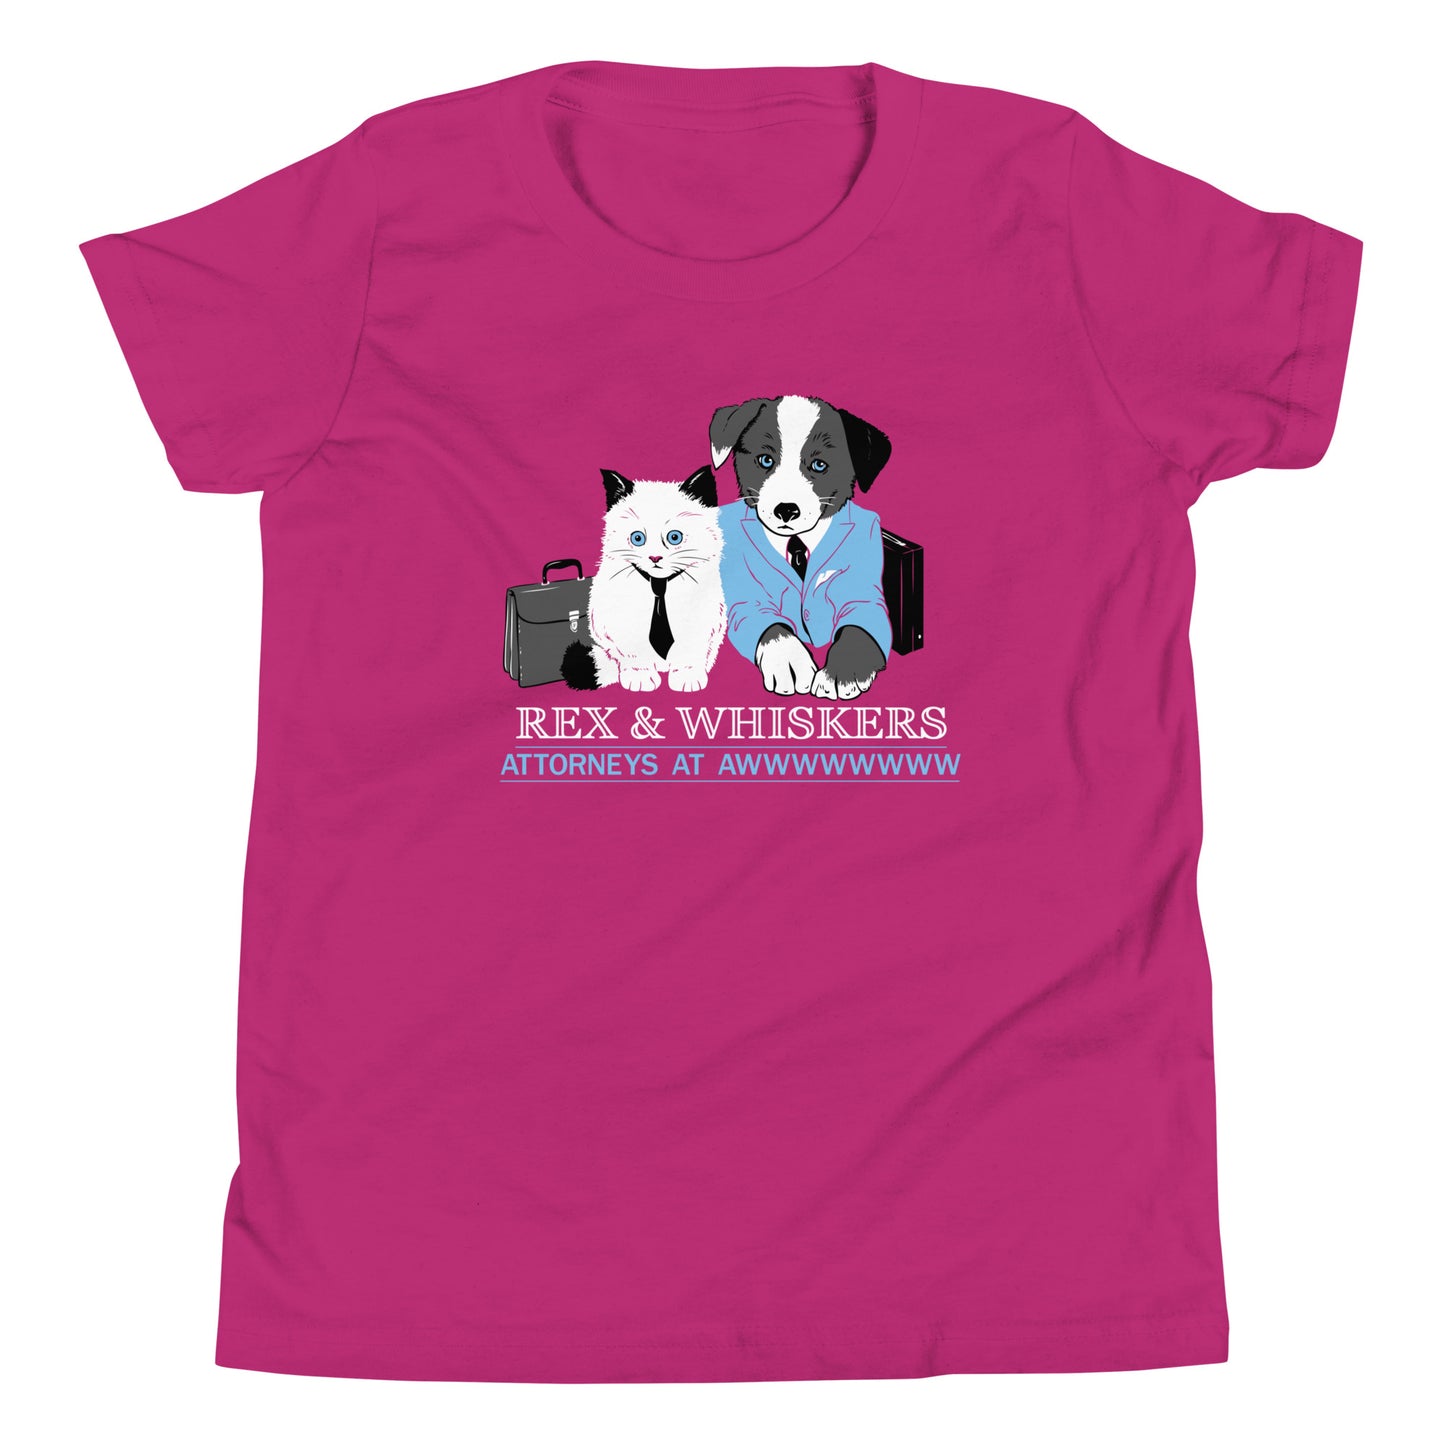 Rex and Whiskers Attorneys Kid's Youth Tee